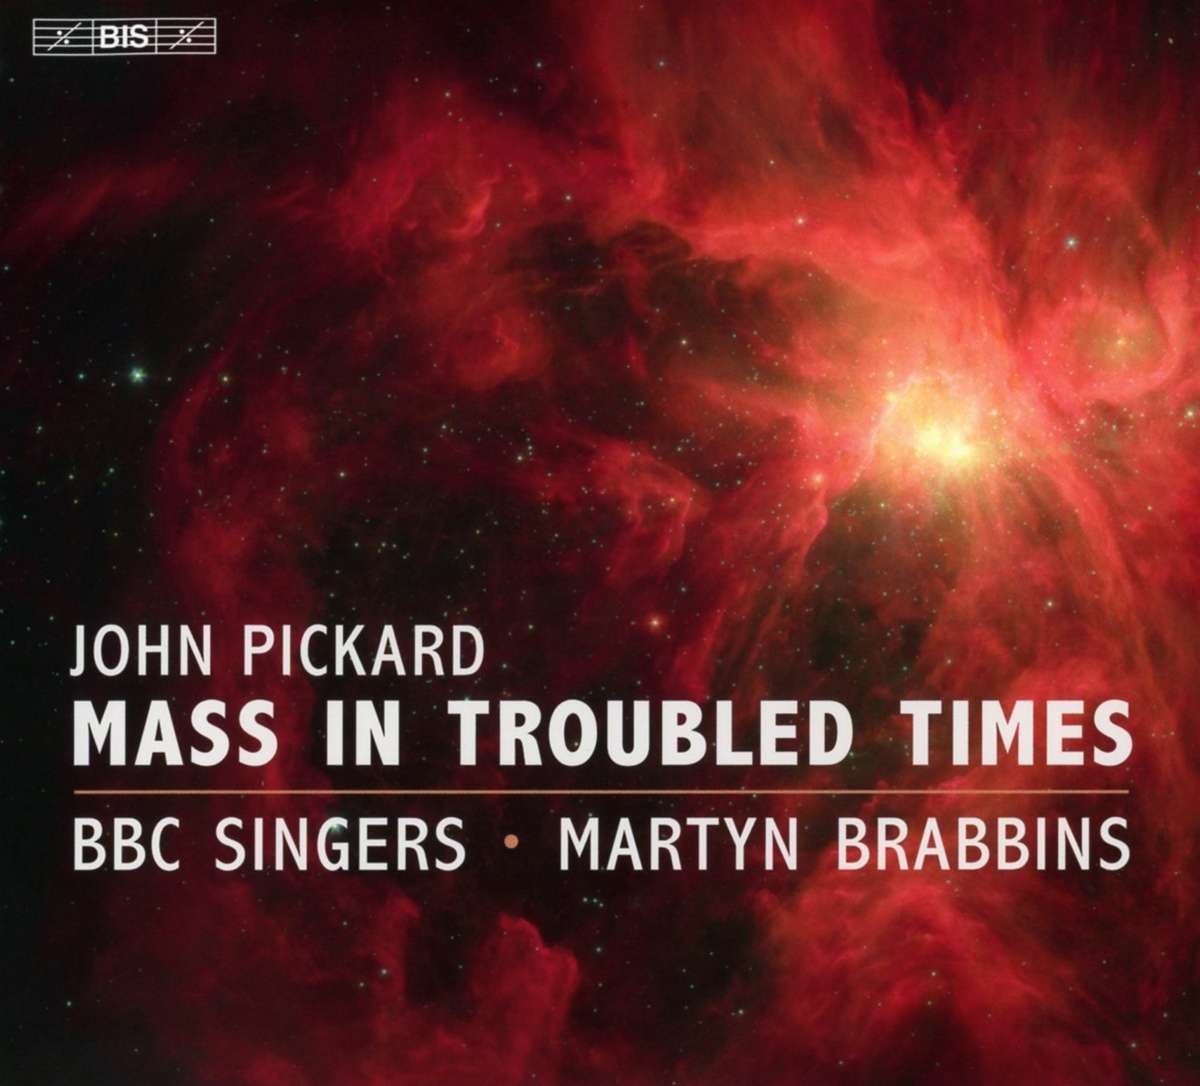 Bbc Singers / Martyn Brabbins - Mass In Troubled Times